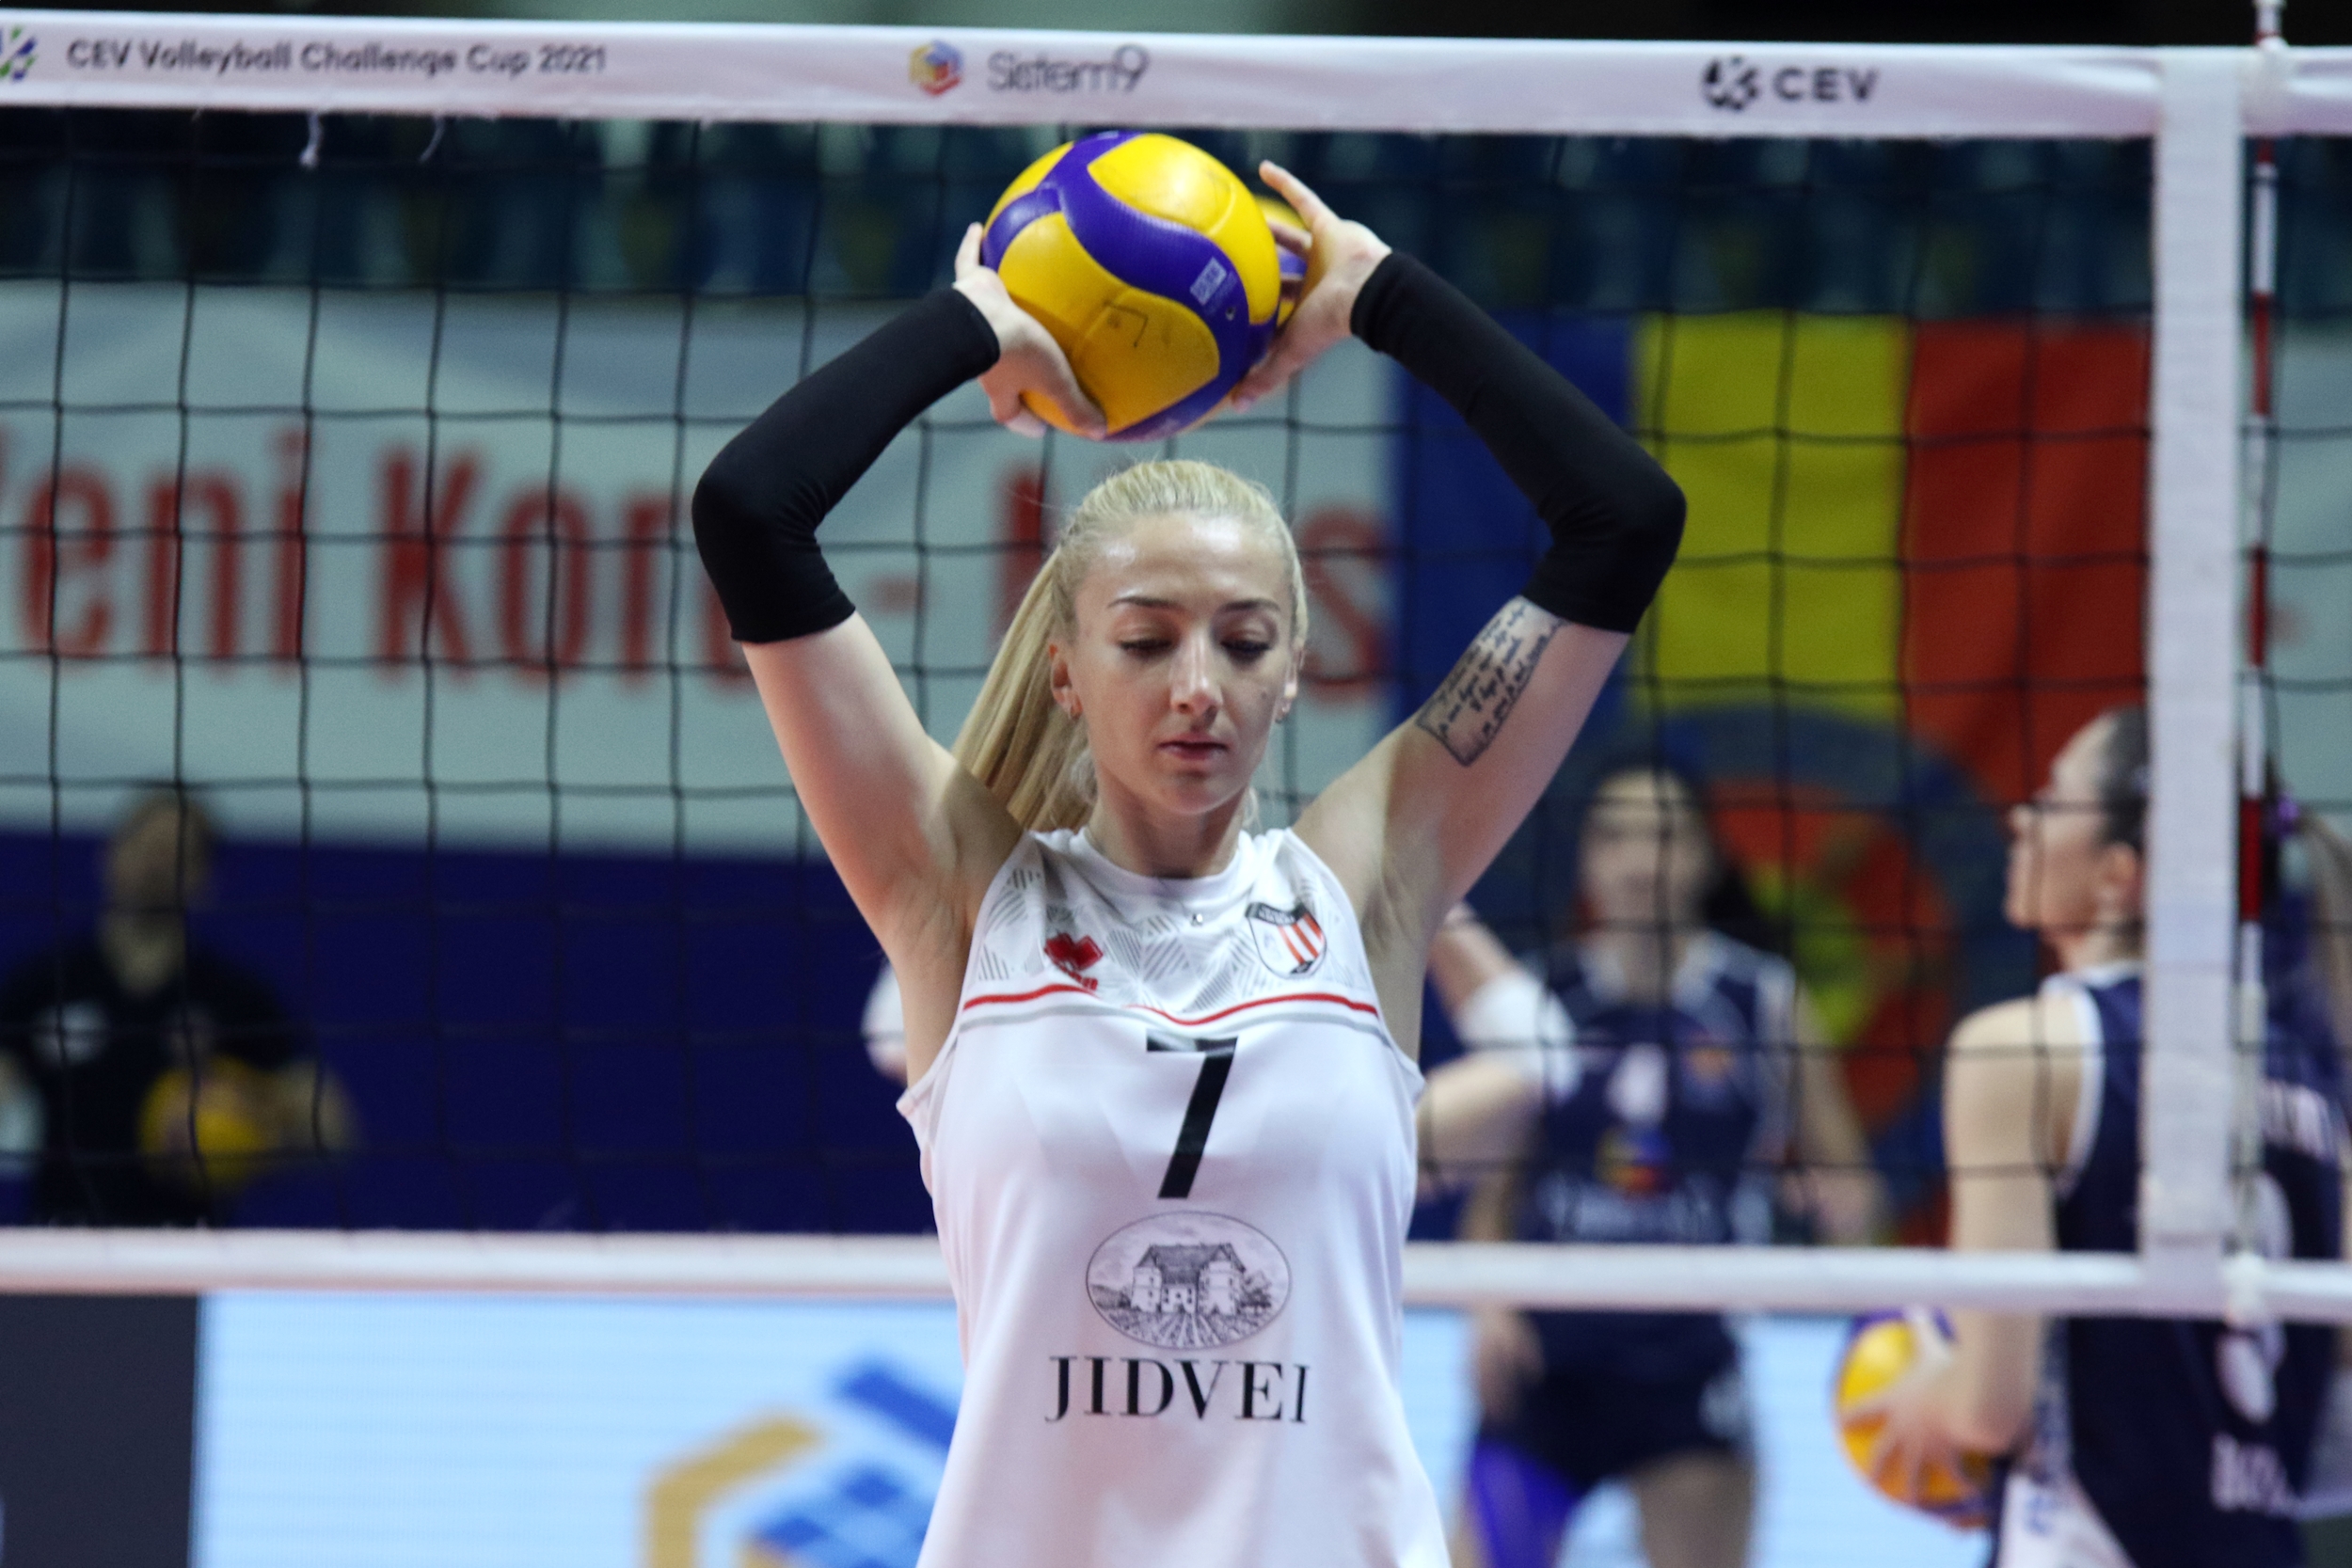 CEV Volleyball Challenge Cup 2021 Women